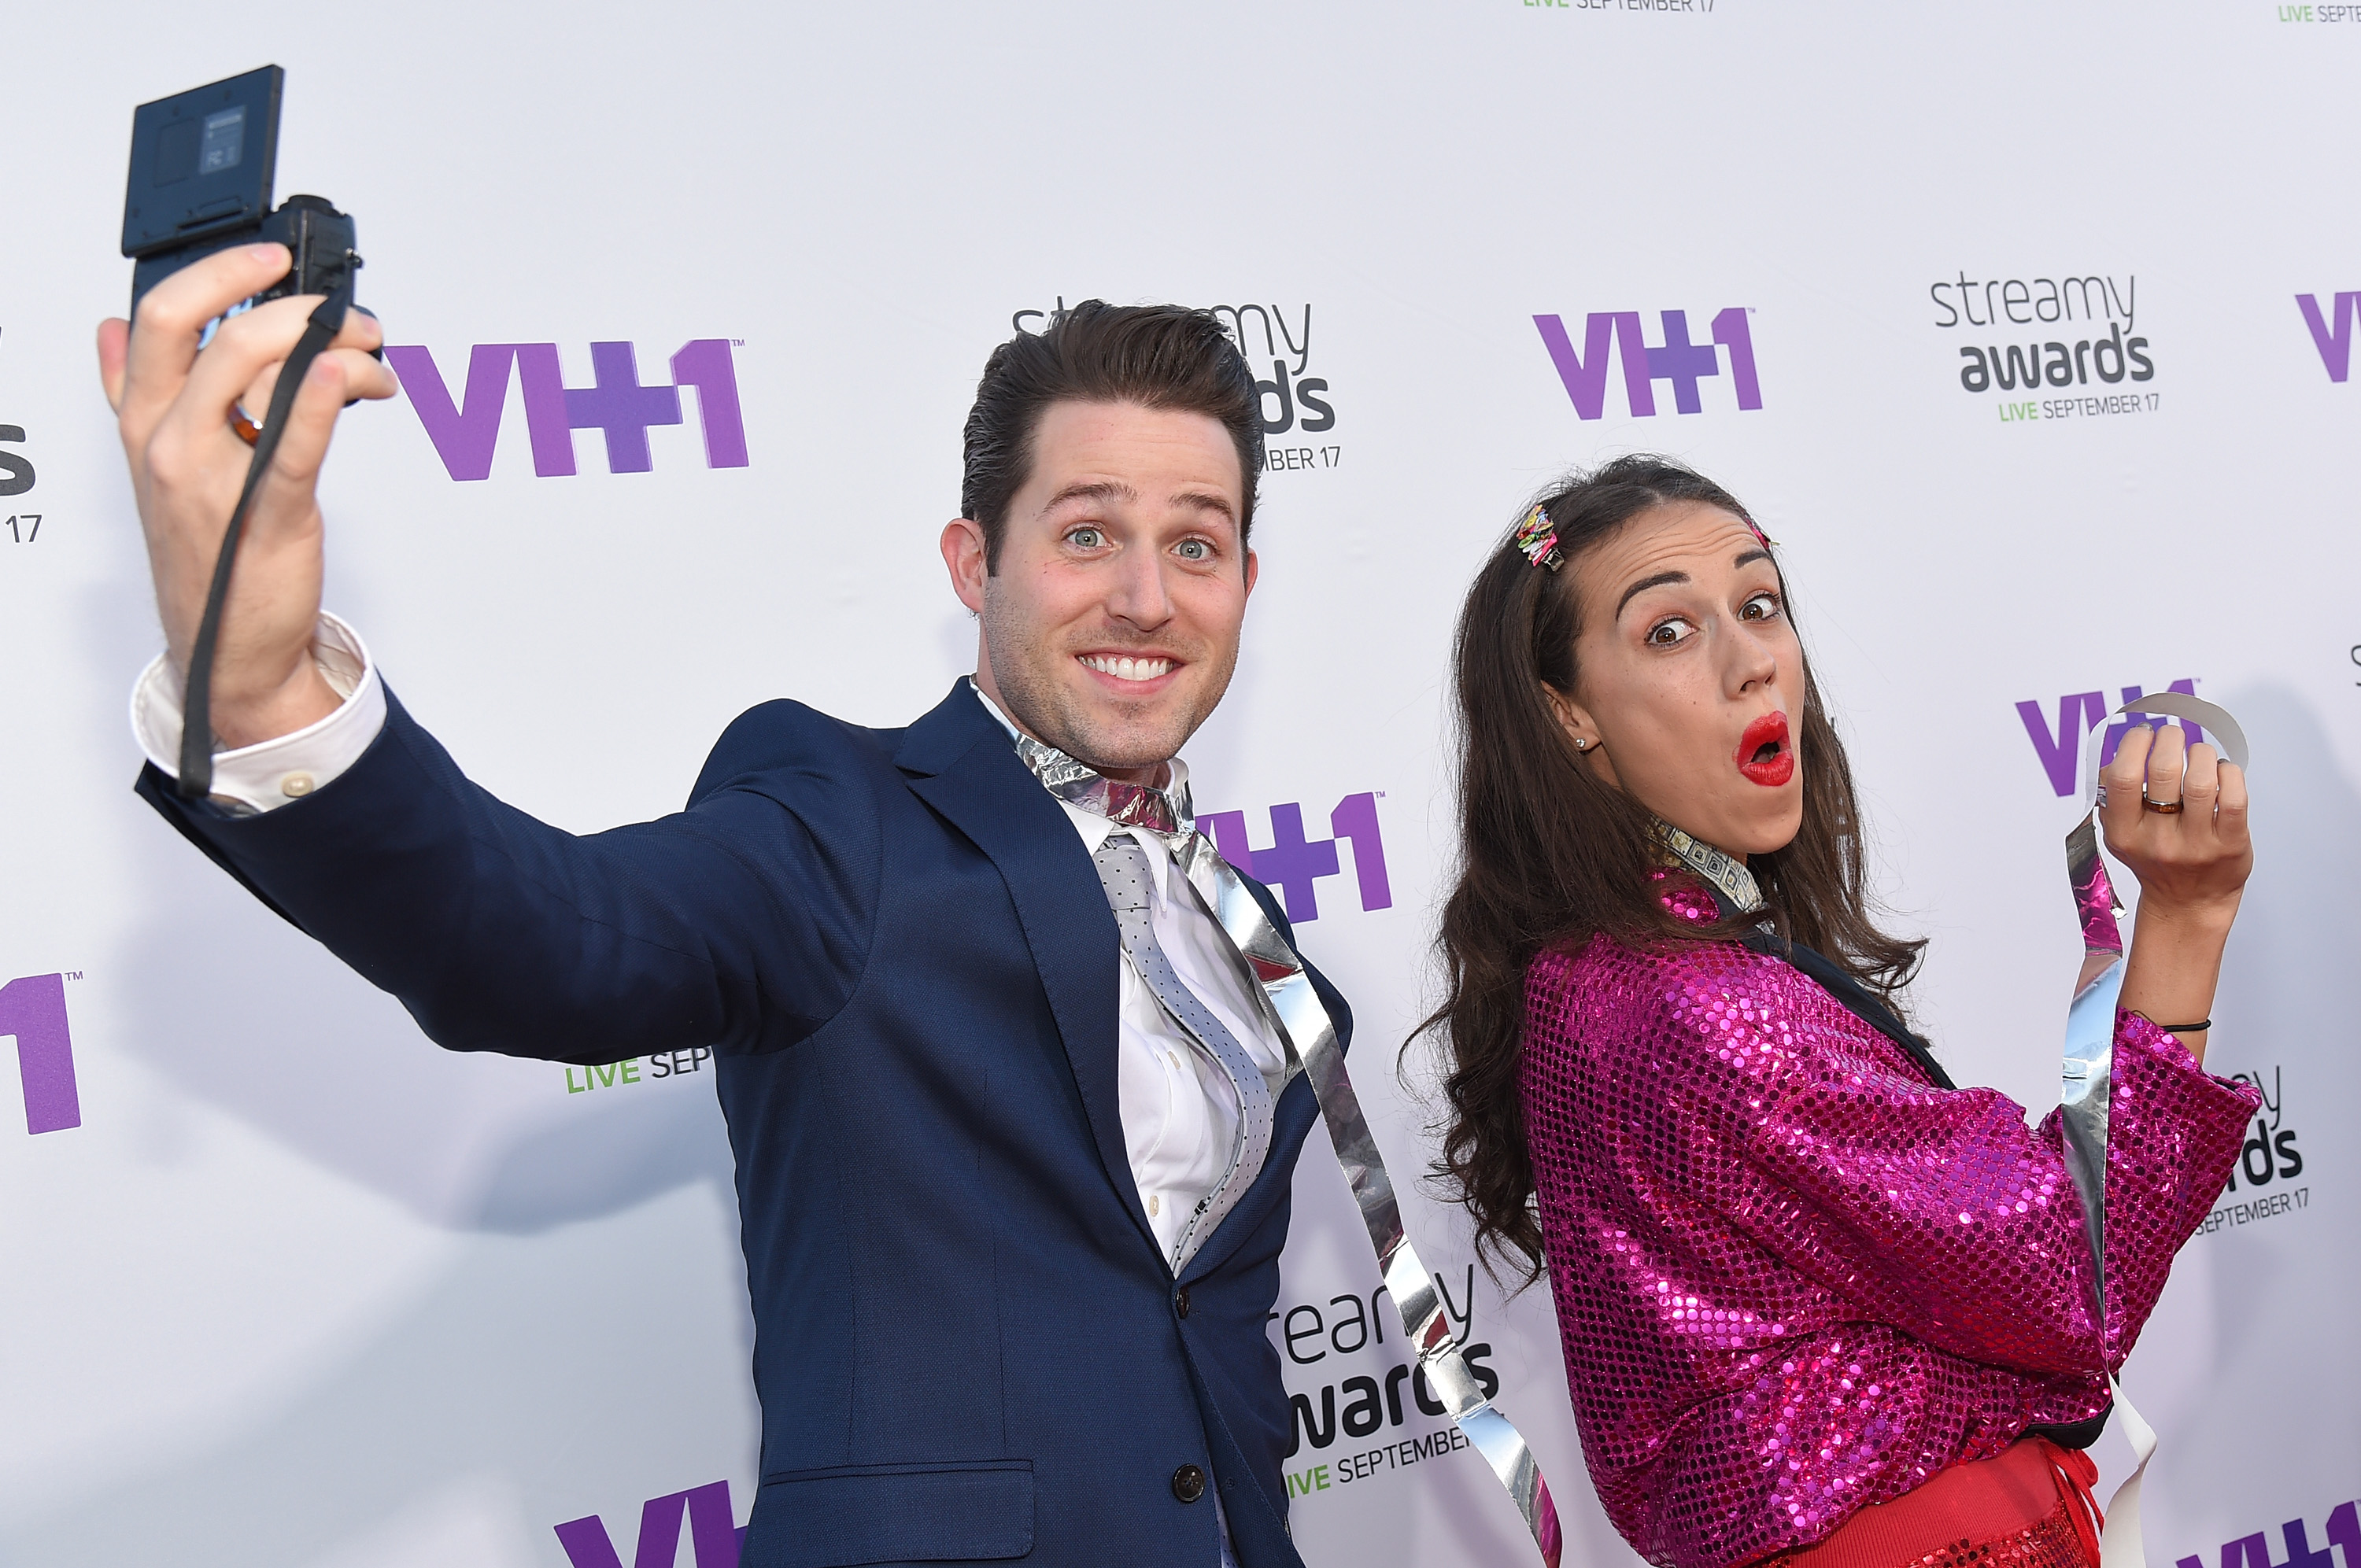 Joshua David Evans and Colleen Ballinger, a.k.a Miranda Sings attends VH1's 5th Annual Streamy Awards at the Hollywood Palladium on Thursday, September 17, 2015, in Los Angeles, California. | Source: Getty Images